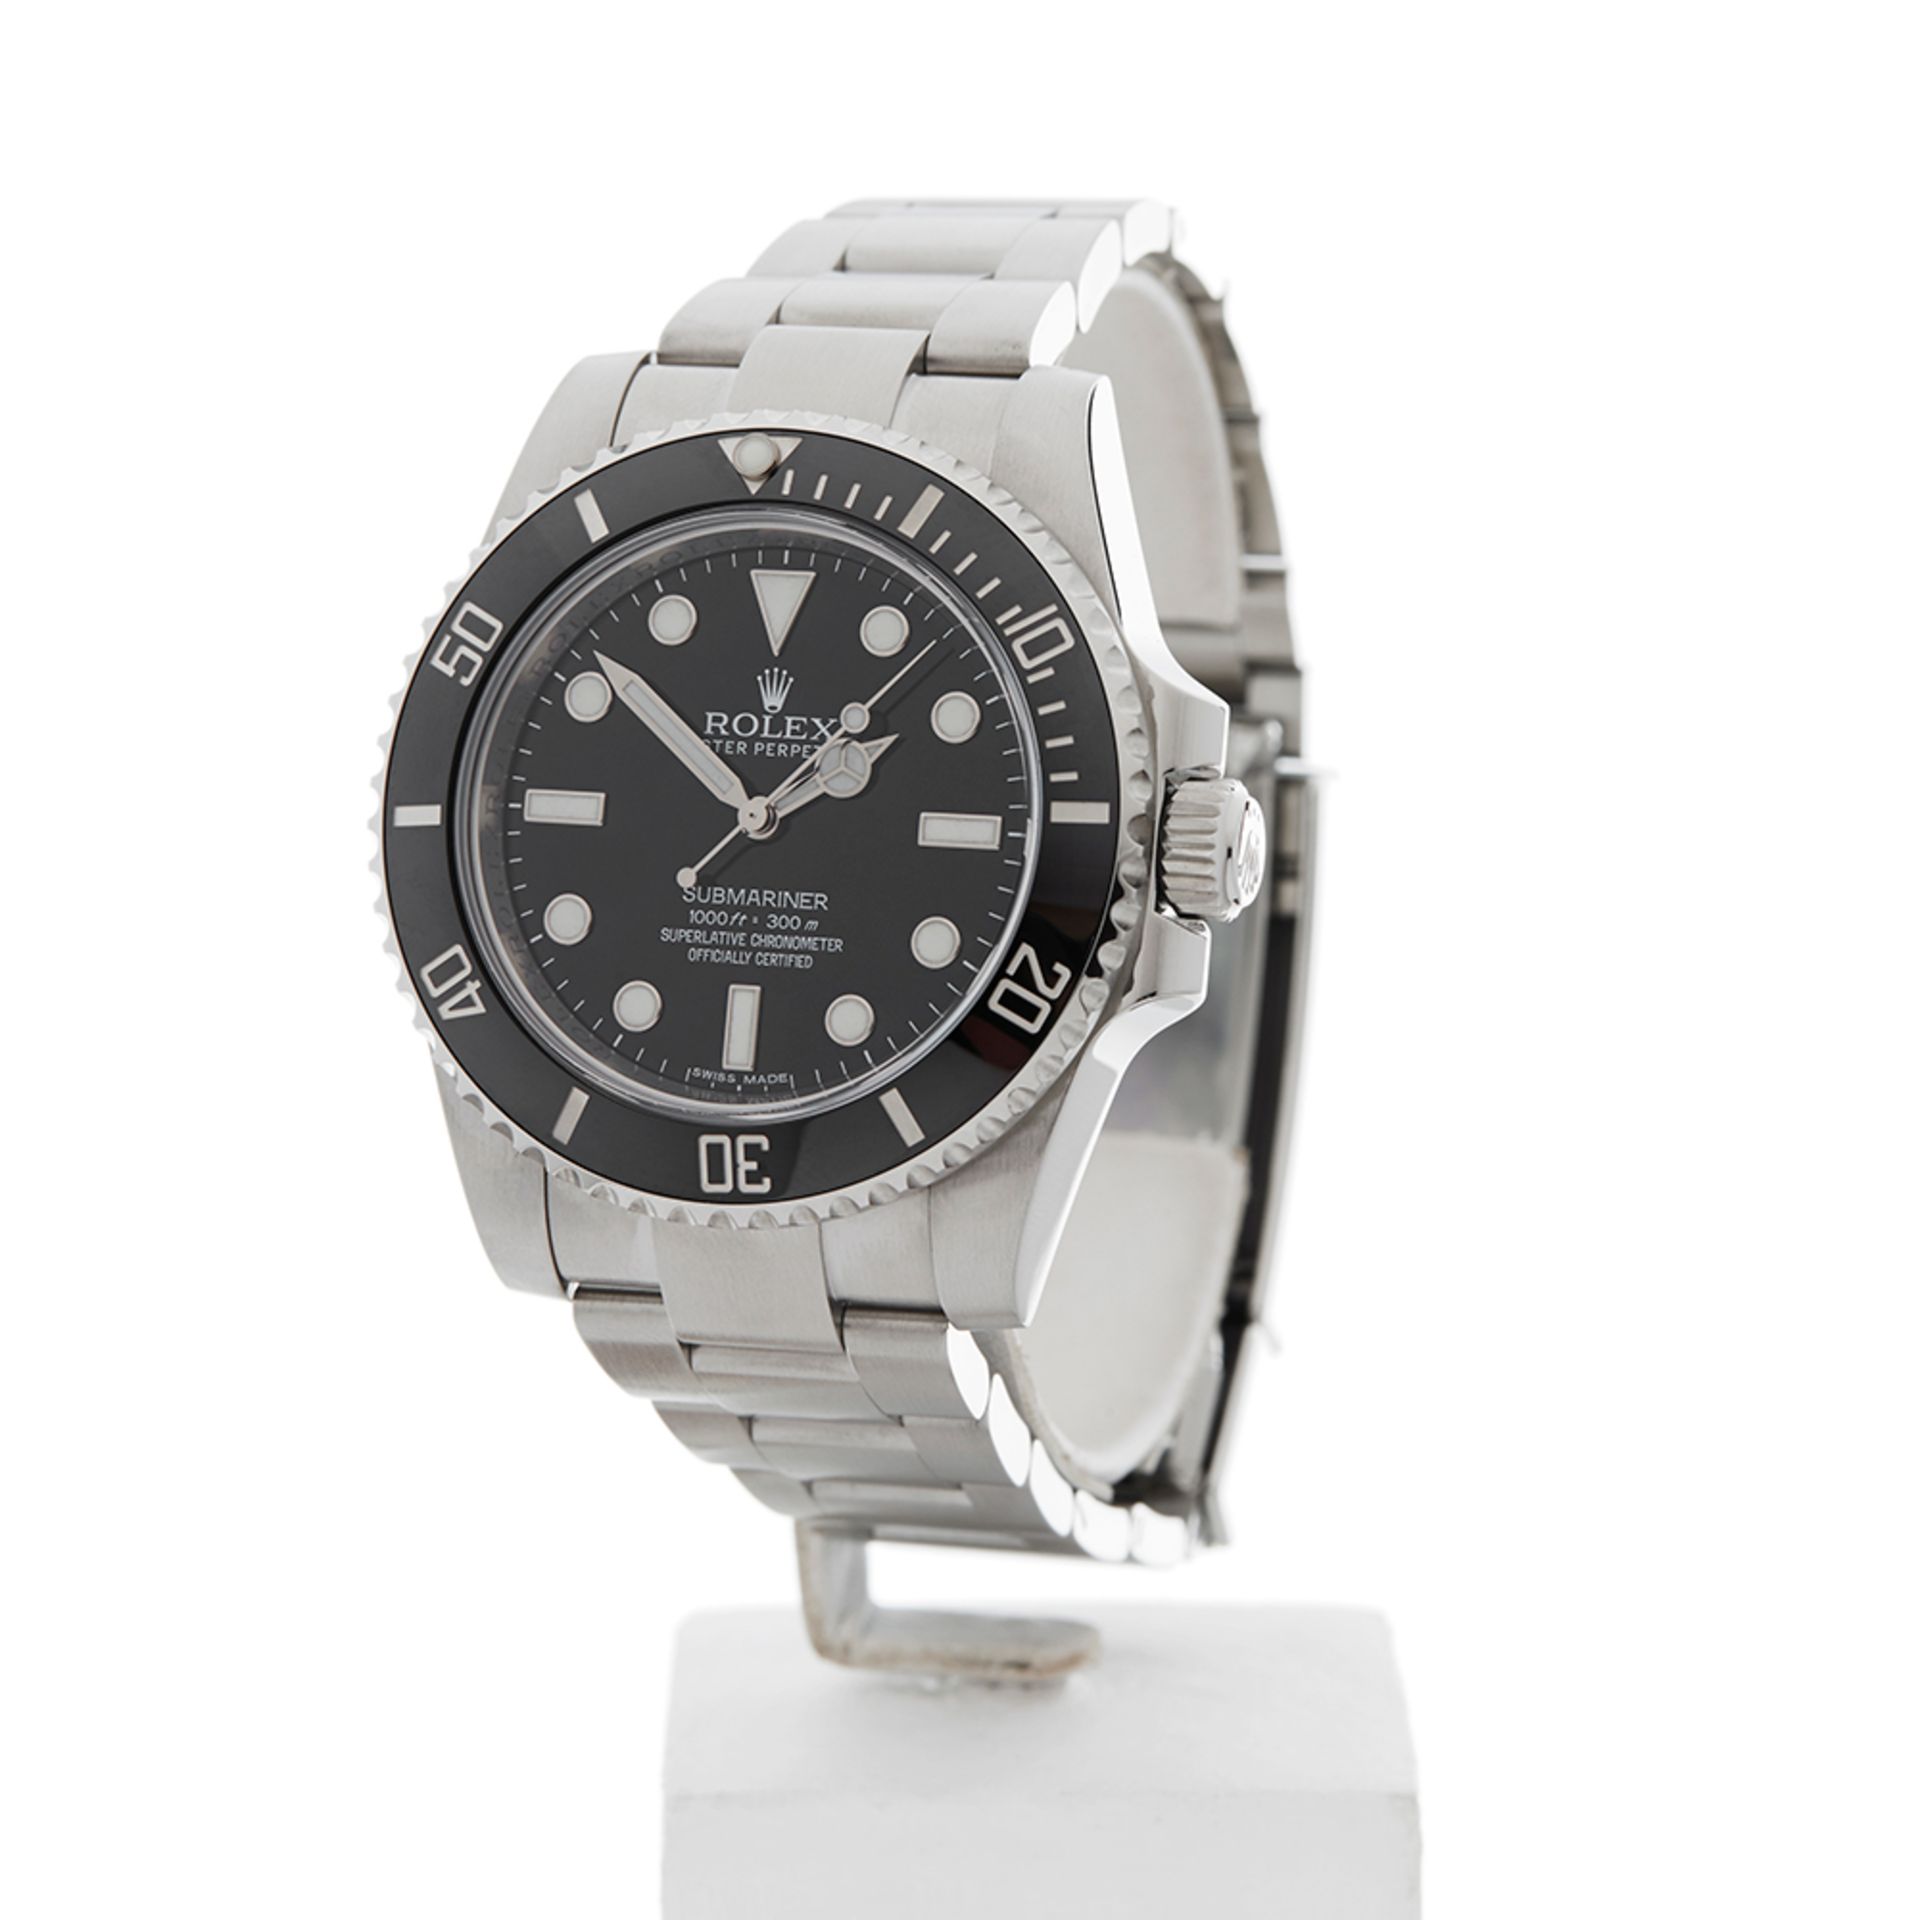 Submariner Non Date 40mm Stainless Steel 114060 - Image 3 of 9